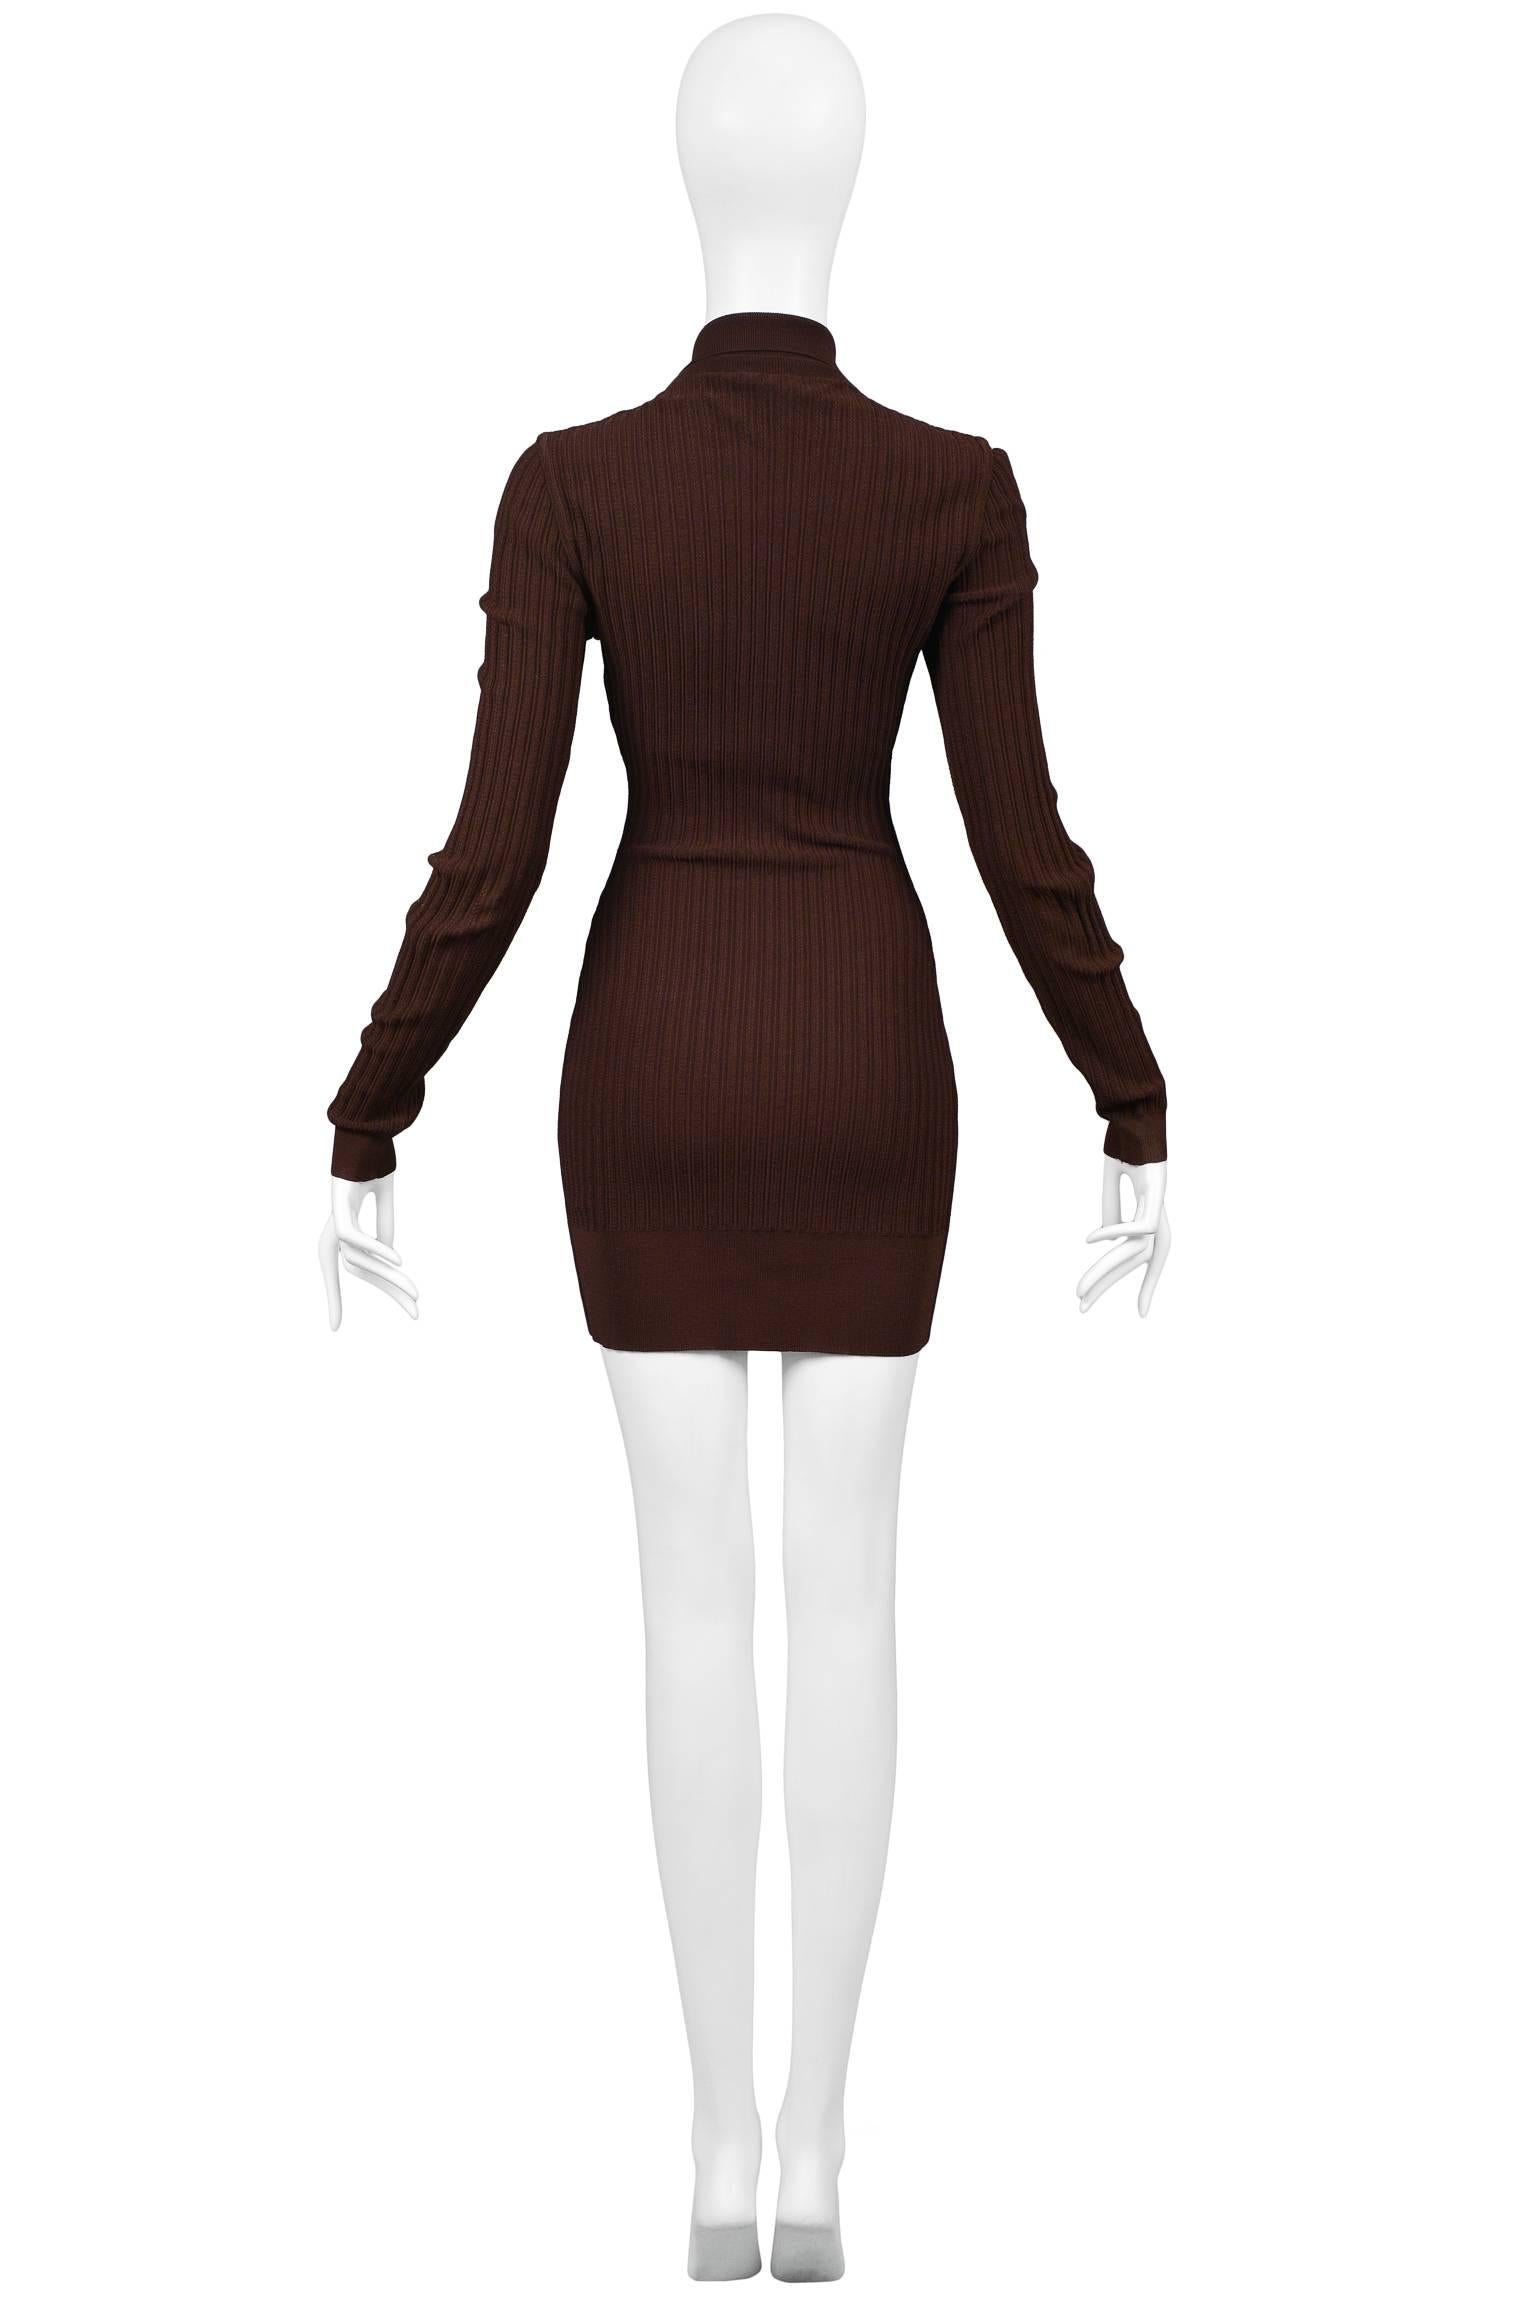 Vintage Azzedine Alaia brown knit bodycon ribbed dress with 2 way zipper closure at front. Zipper can be opened at neckline and hem of skirt. Neckline features polo style collar. Please inquire for additional photographs. 